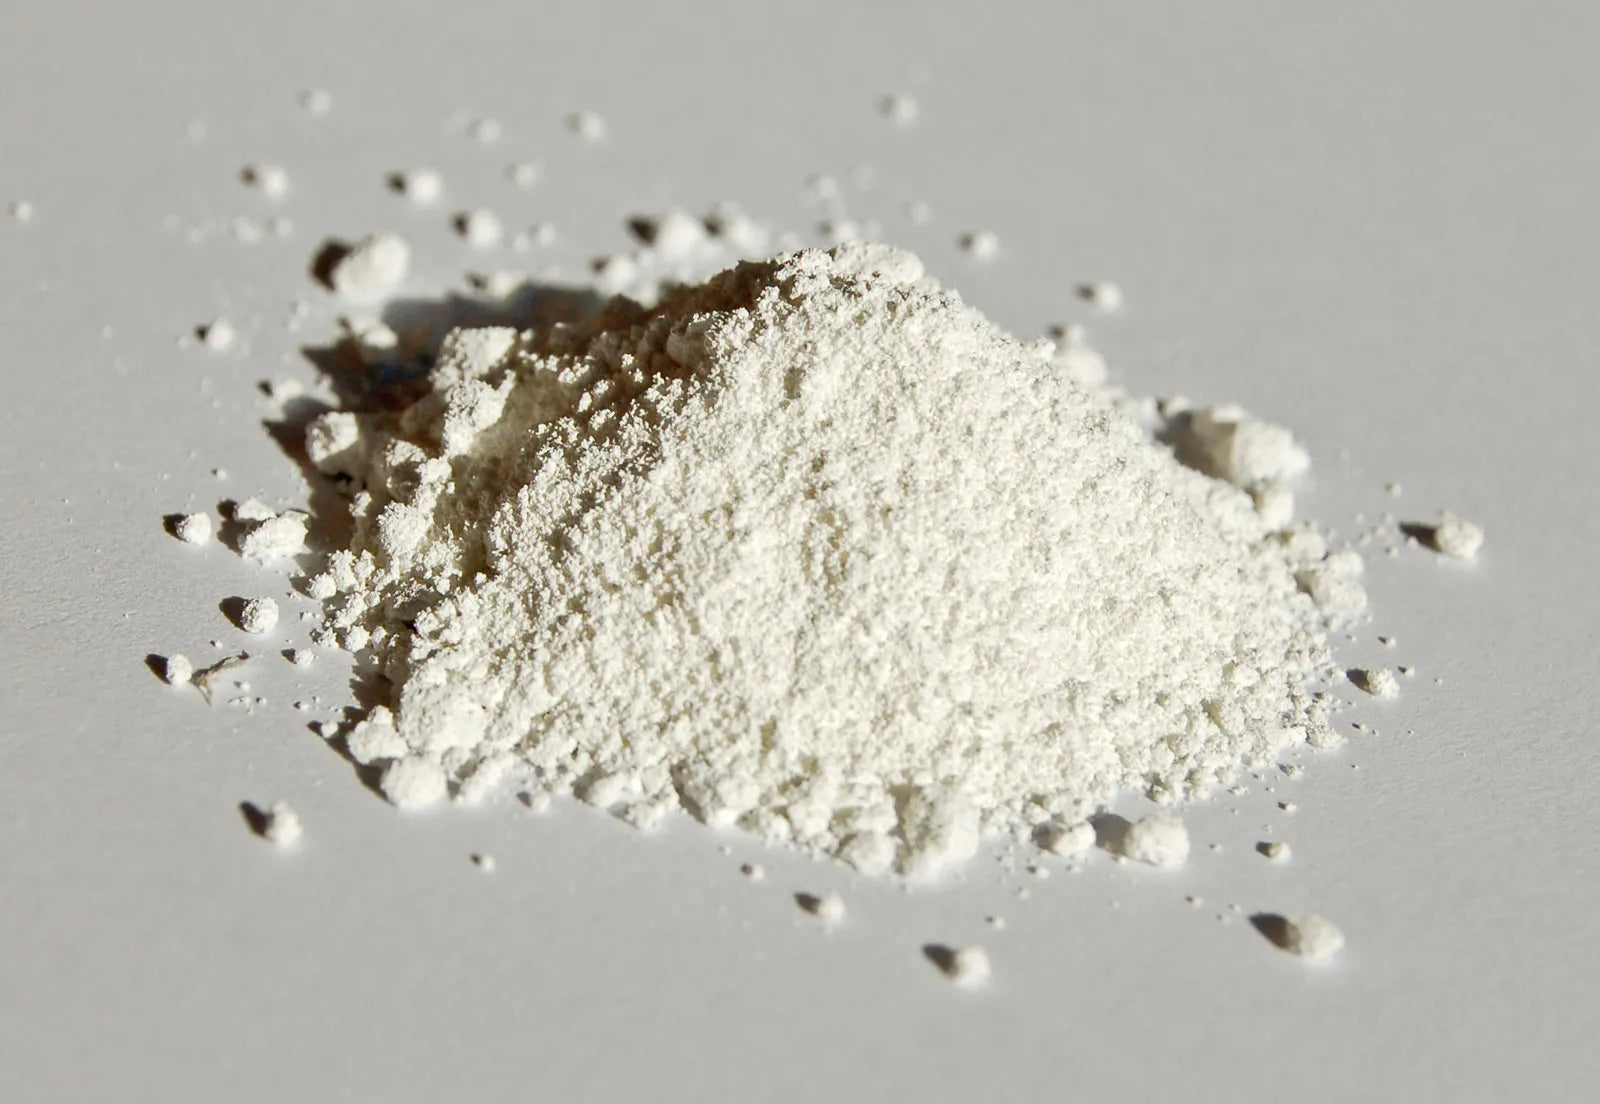 A small mound of fine, white powder is scattered on a light gray surface, with some particles spread loosely around it. The powder appears smooth and slightly clumpy, suggesting a consistency similar to flour or powdered sugar.